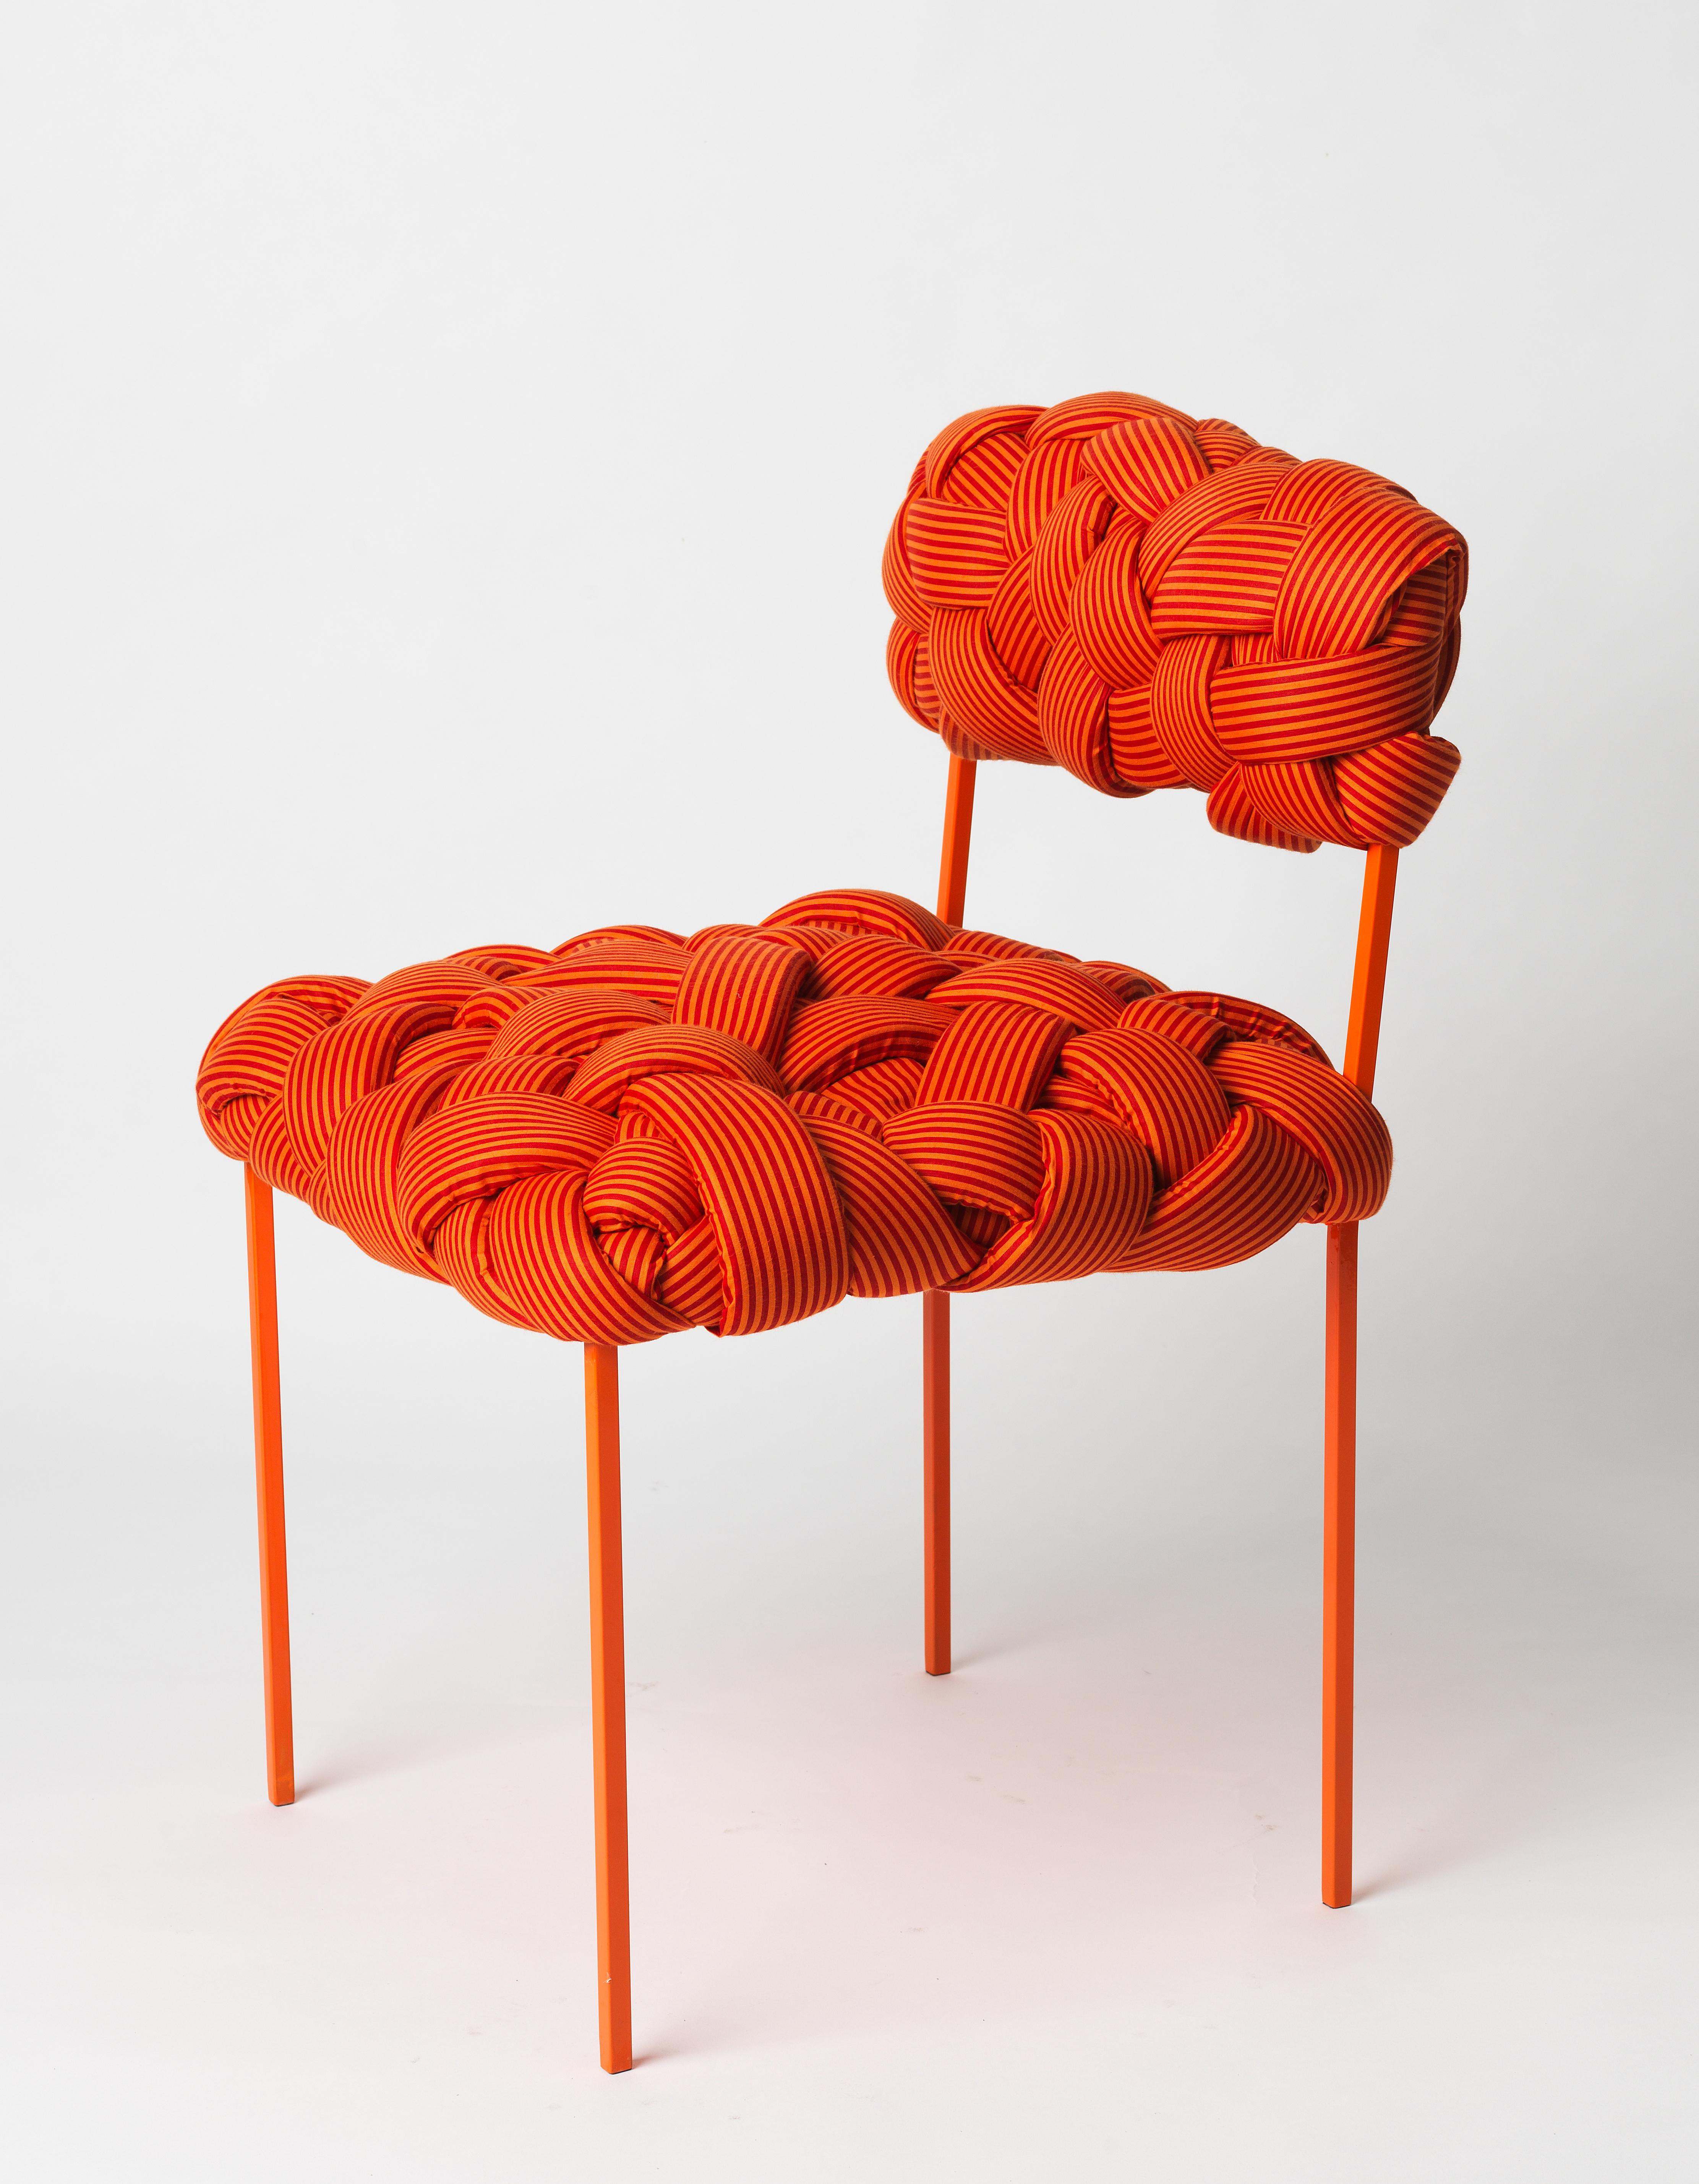 This contemporary chair is part of the Cloud collection, which was created around the concept of trees. These contemporary stools and benches are made with cotton fabric and foam stripes, woven and stitched by hand. Each piece is unique, as the